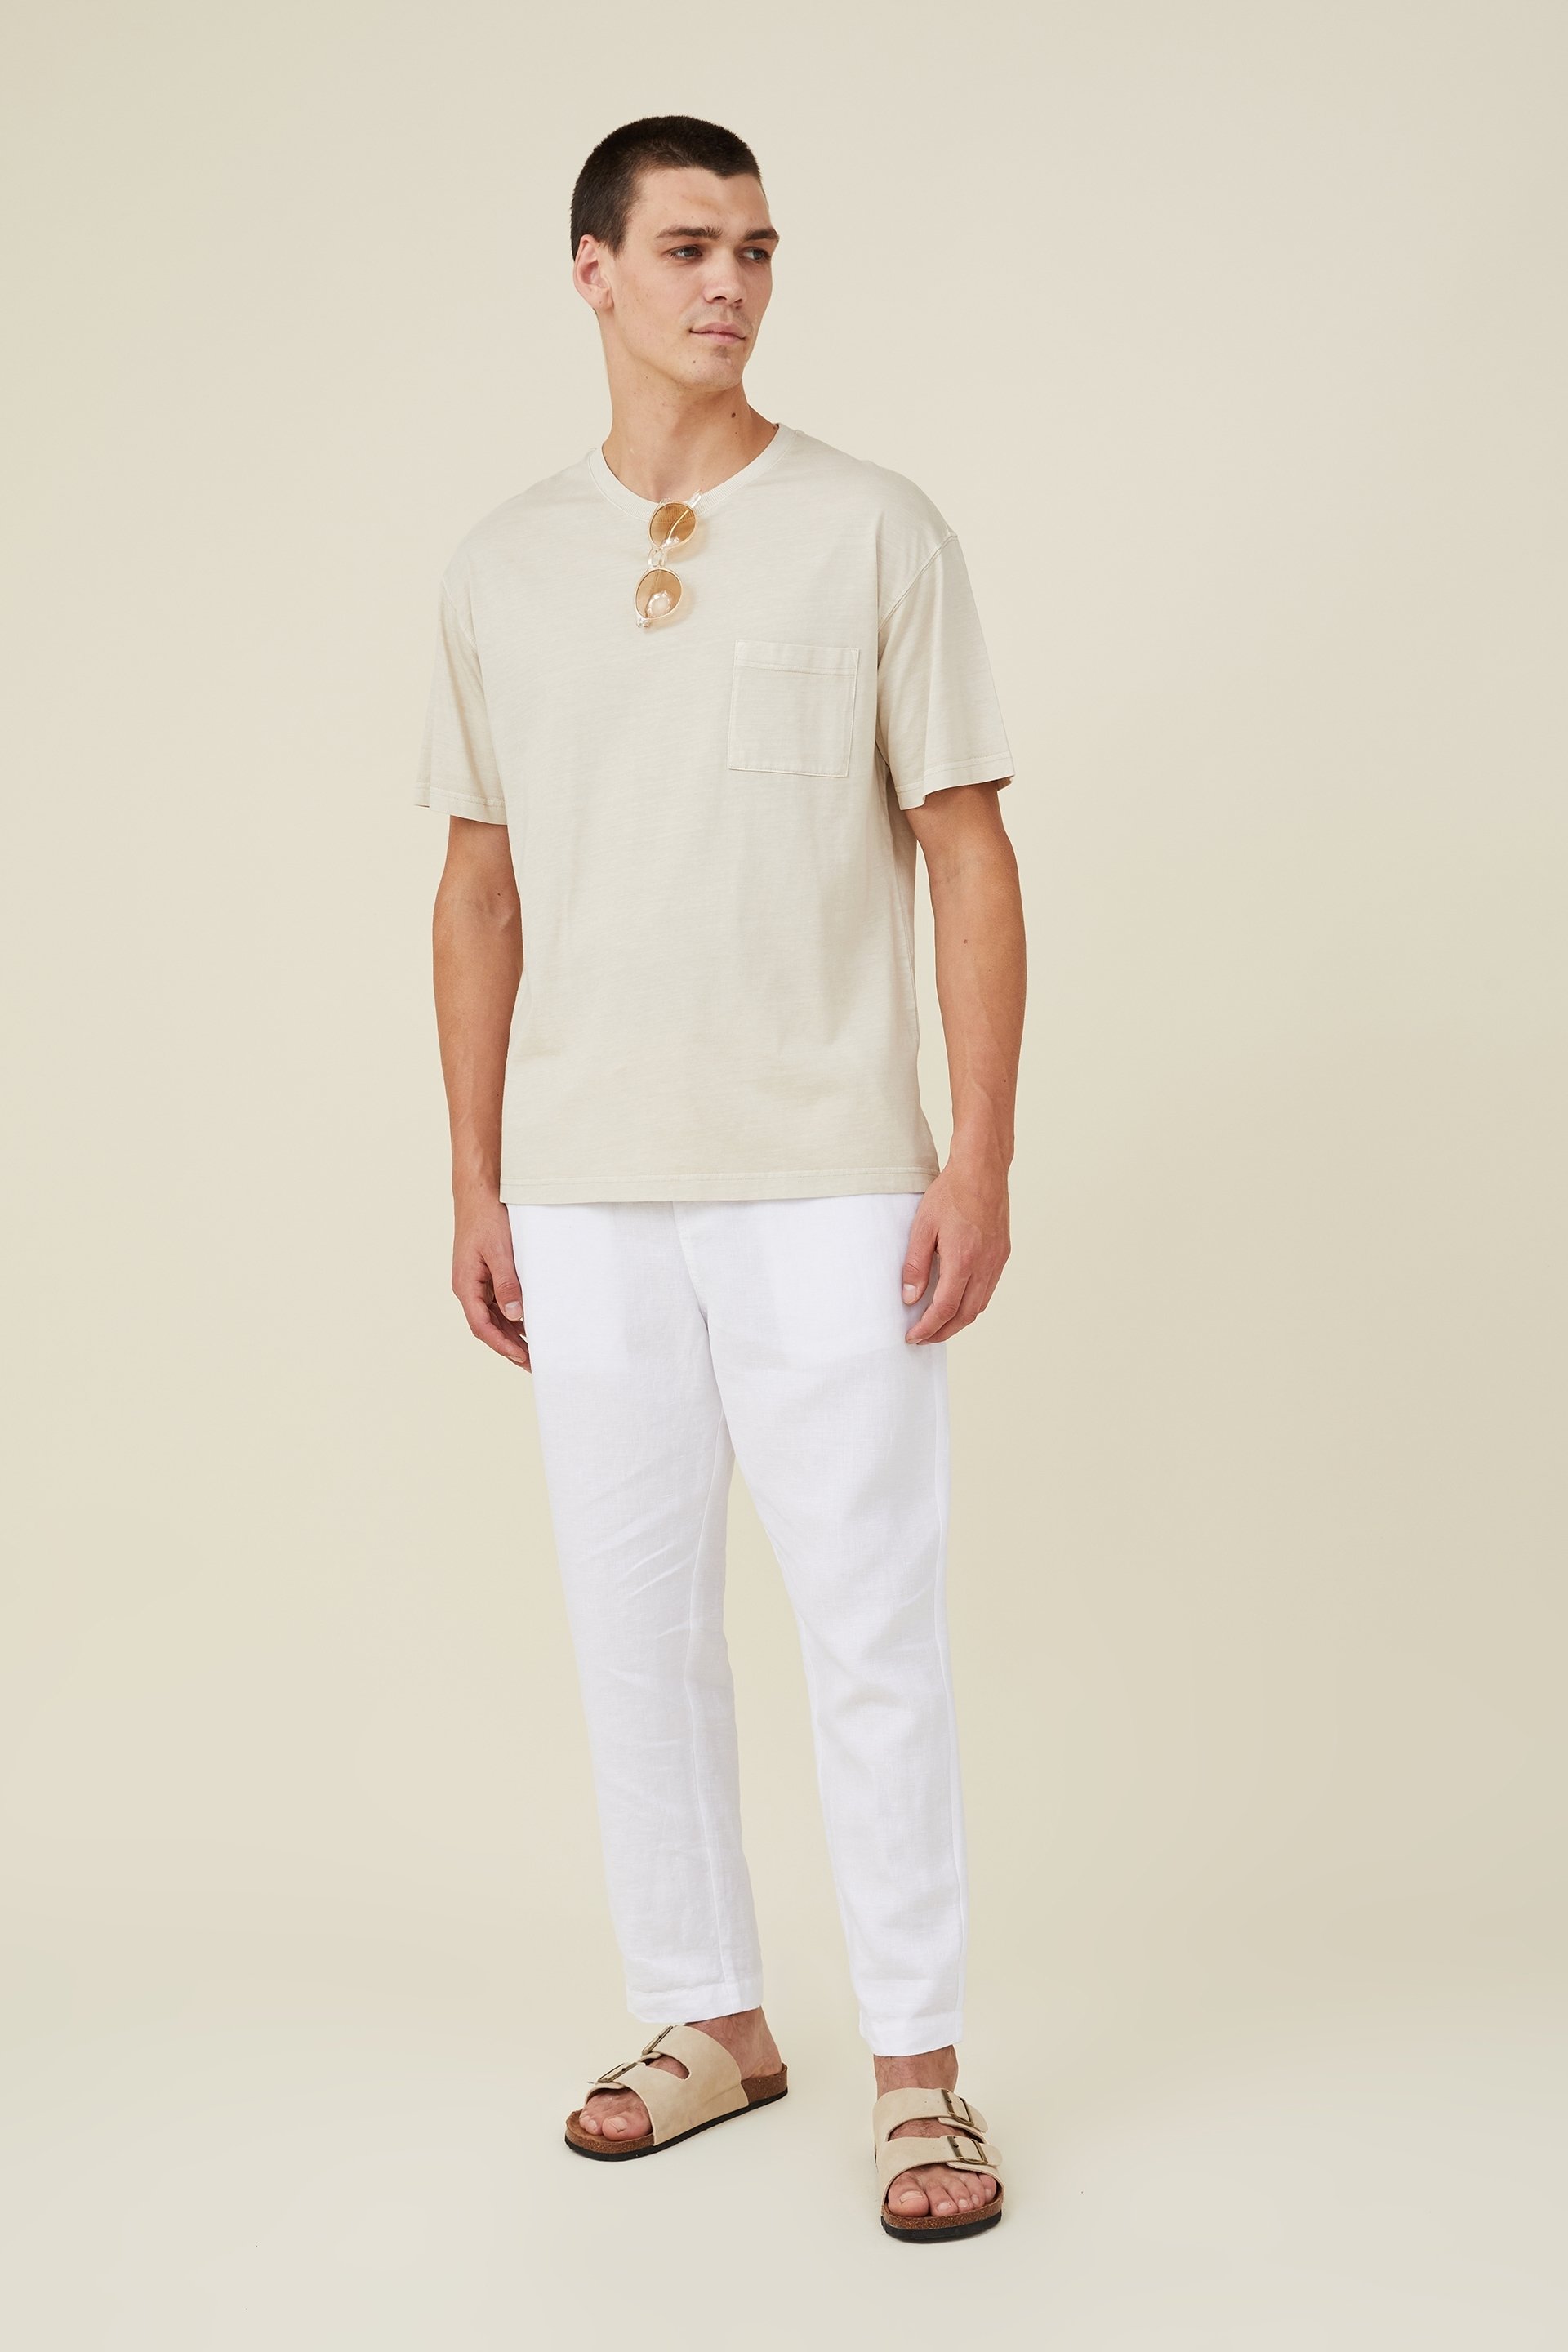 ANOTHER TOMORROW + NET SUSTAIN double-breasted linen shirt | NET-A-PORTER